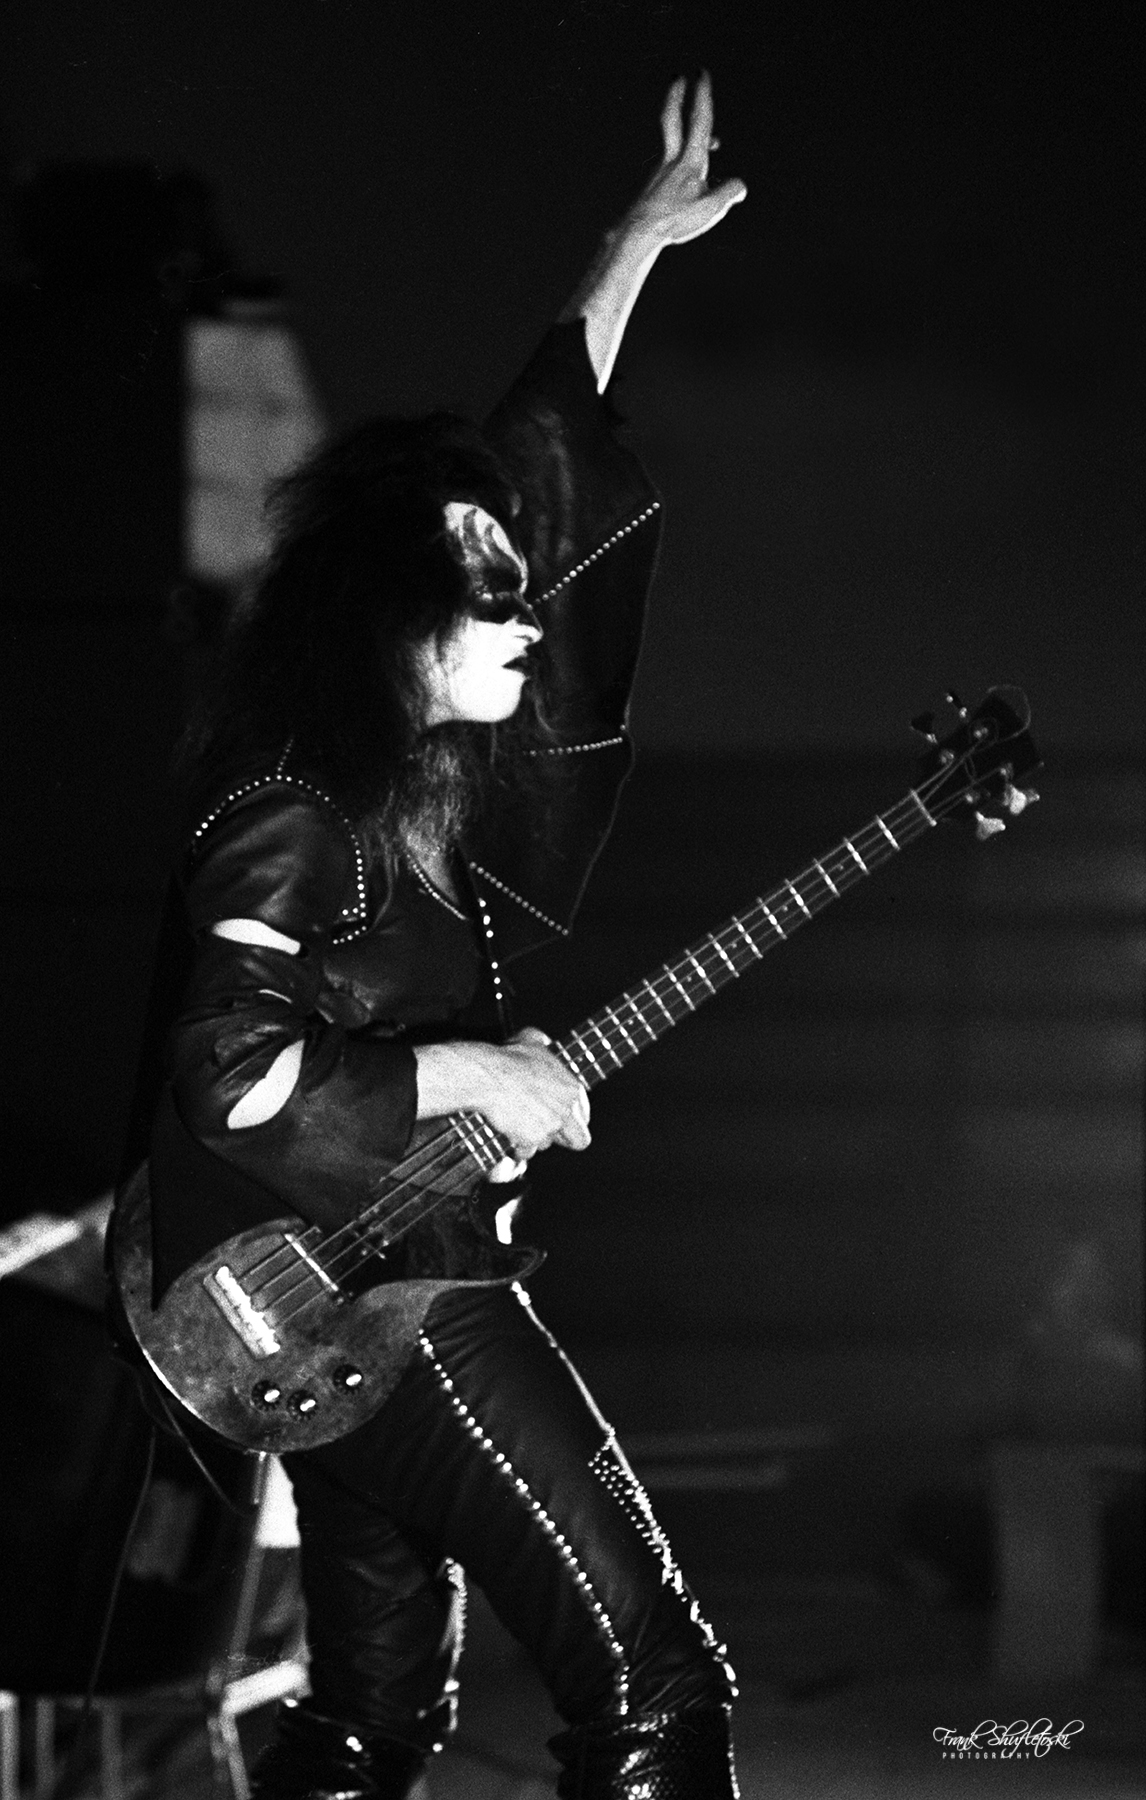 KISS performing at the Southern Alberta Institute of Technology on Feb. 6, 1974.